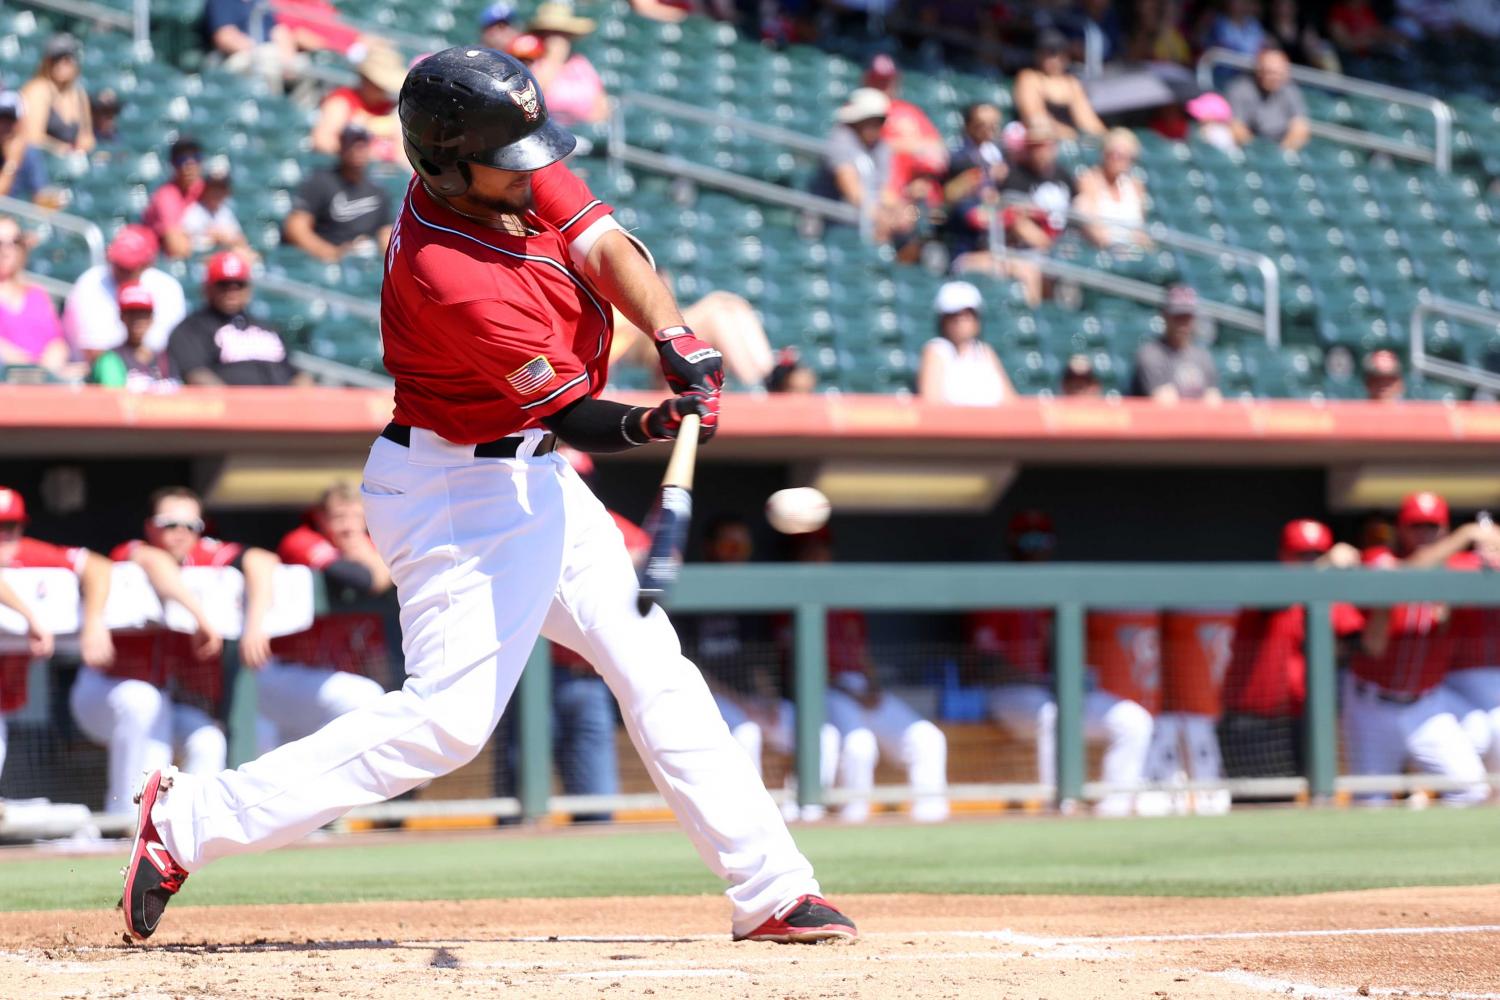 Chihuahuas complete sweep against the Bees